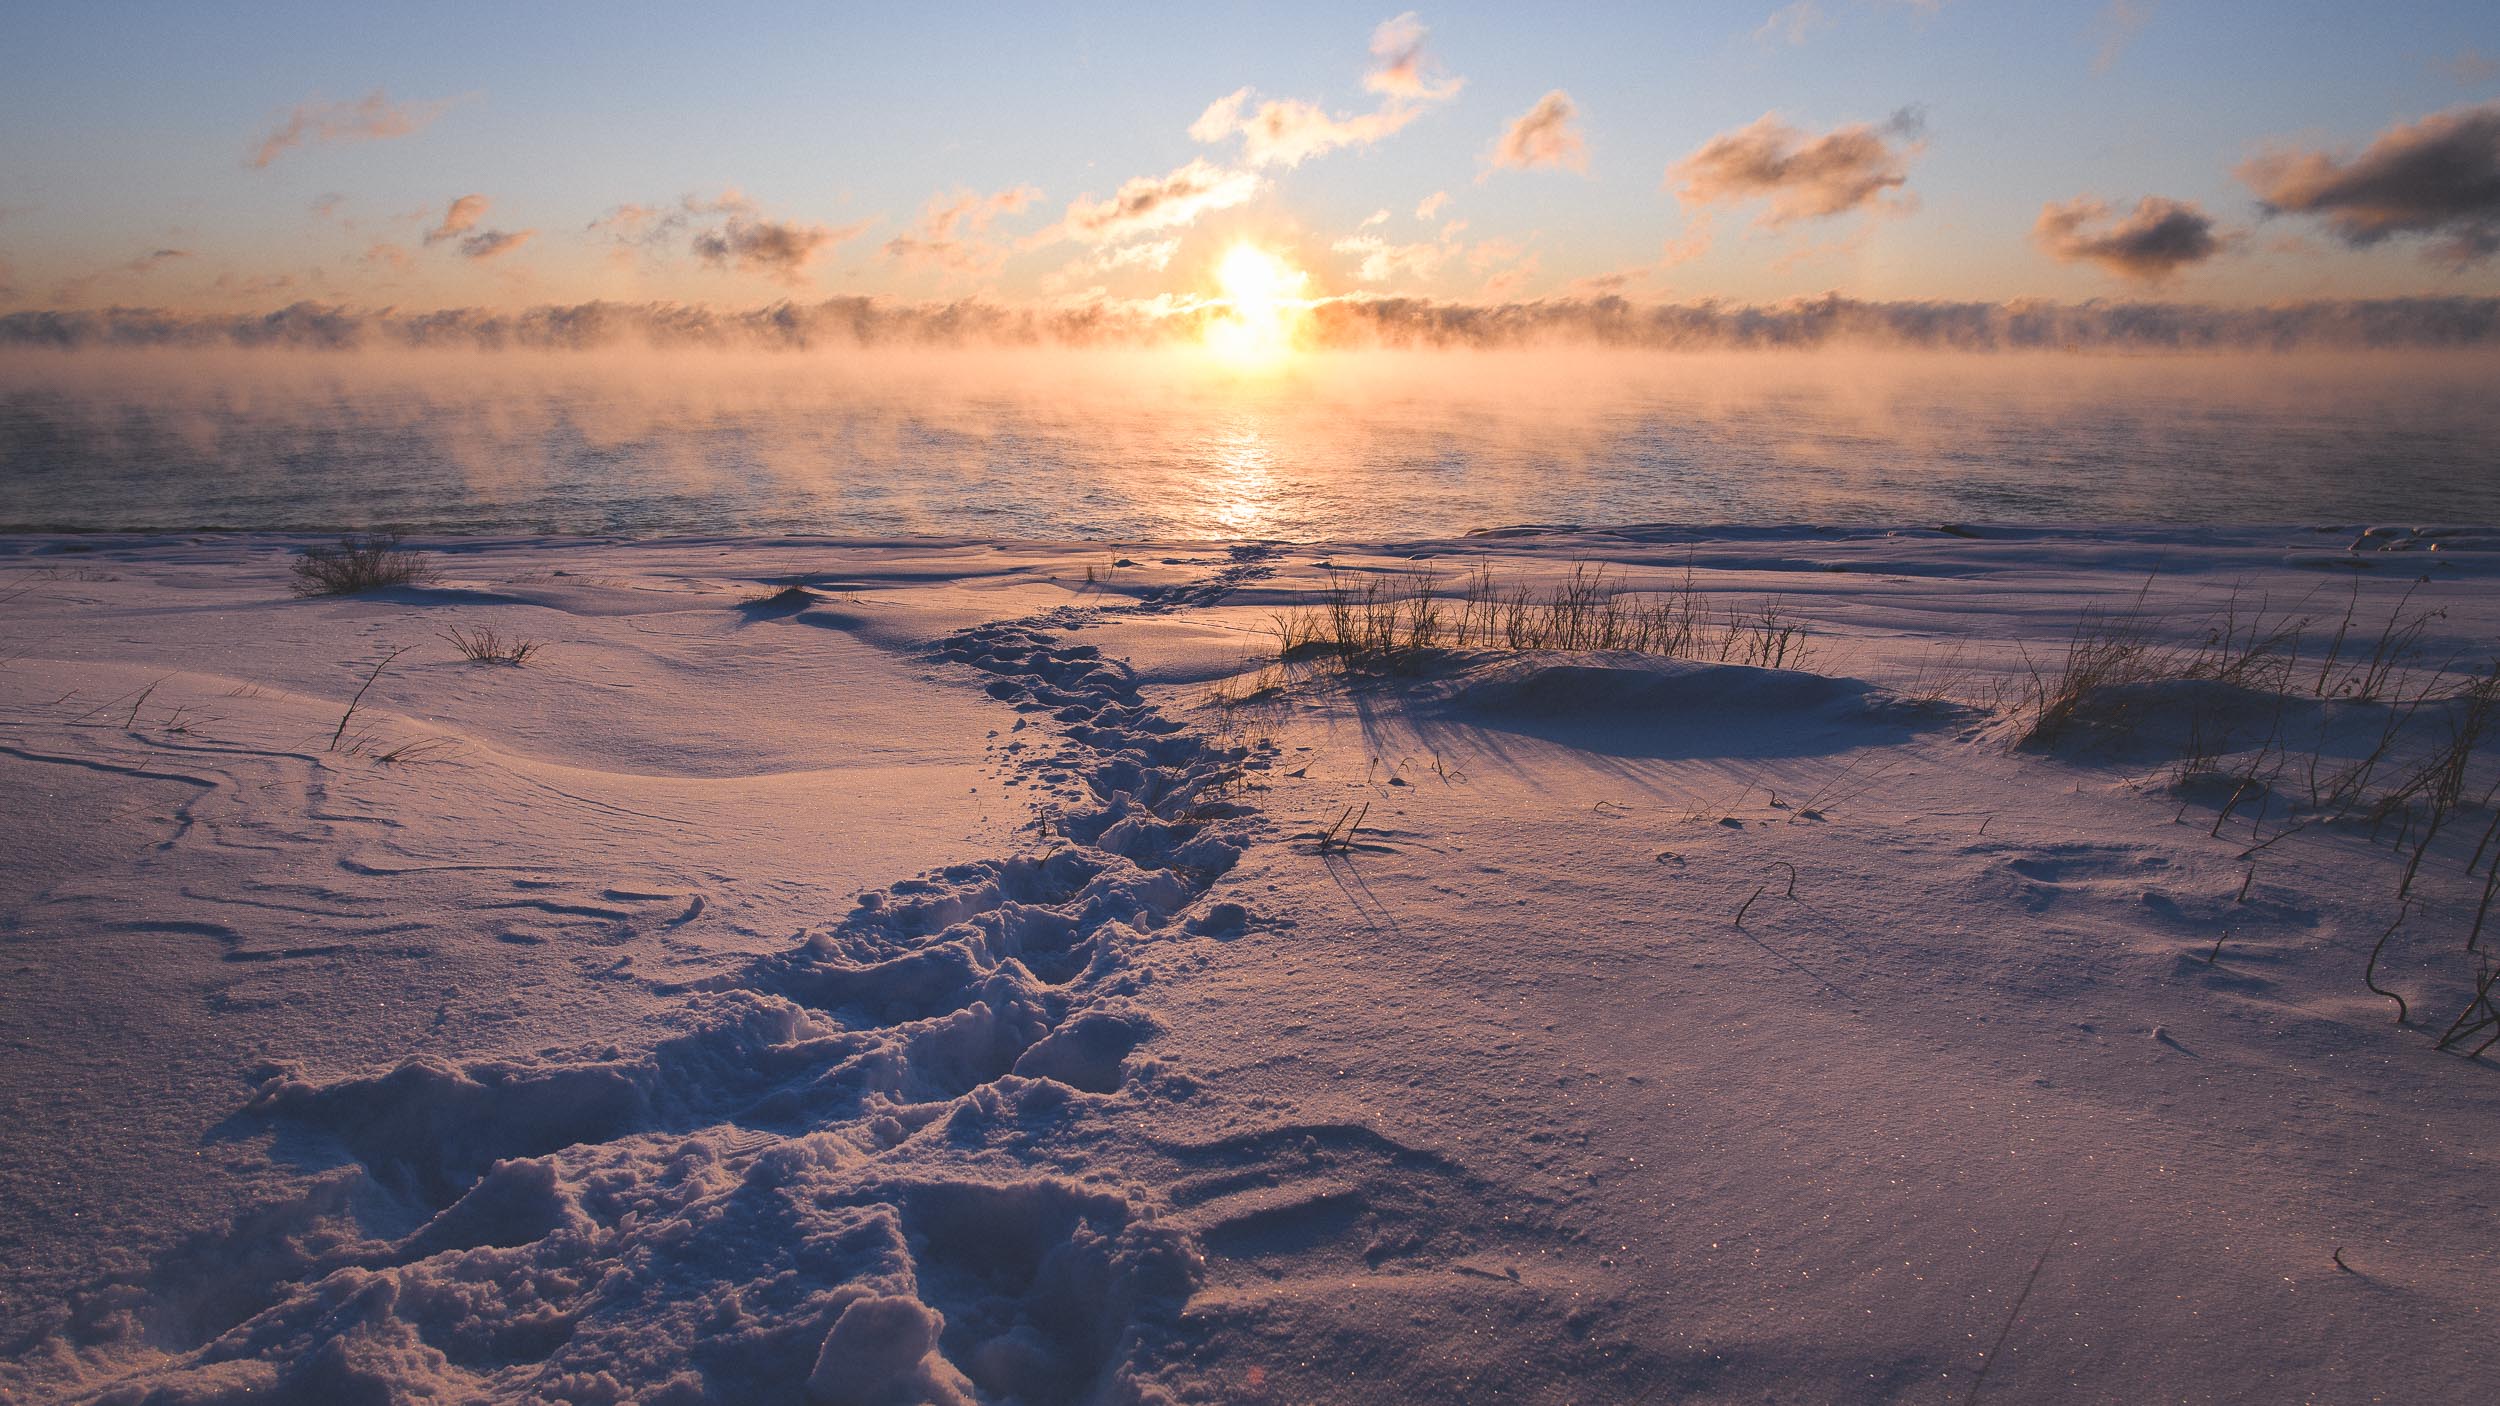 Footsteps lead to water's edge on Lake Superior for a sunrise at Gooseberry Falls State Park on Lake Superior in Minnesota.